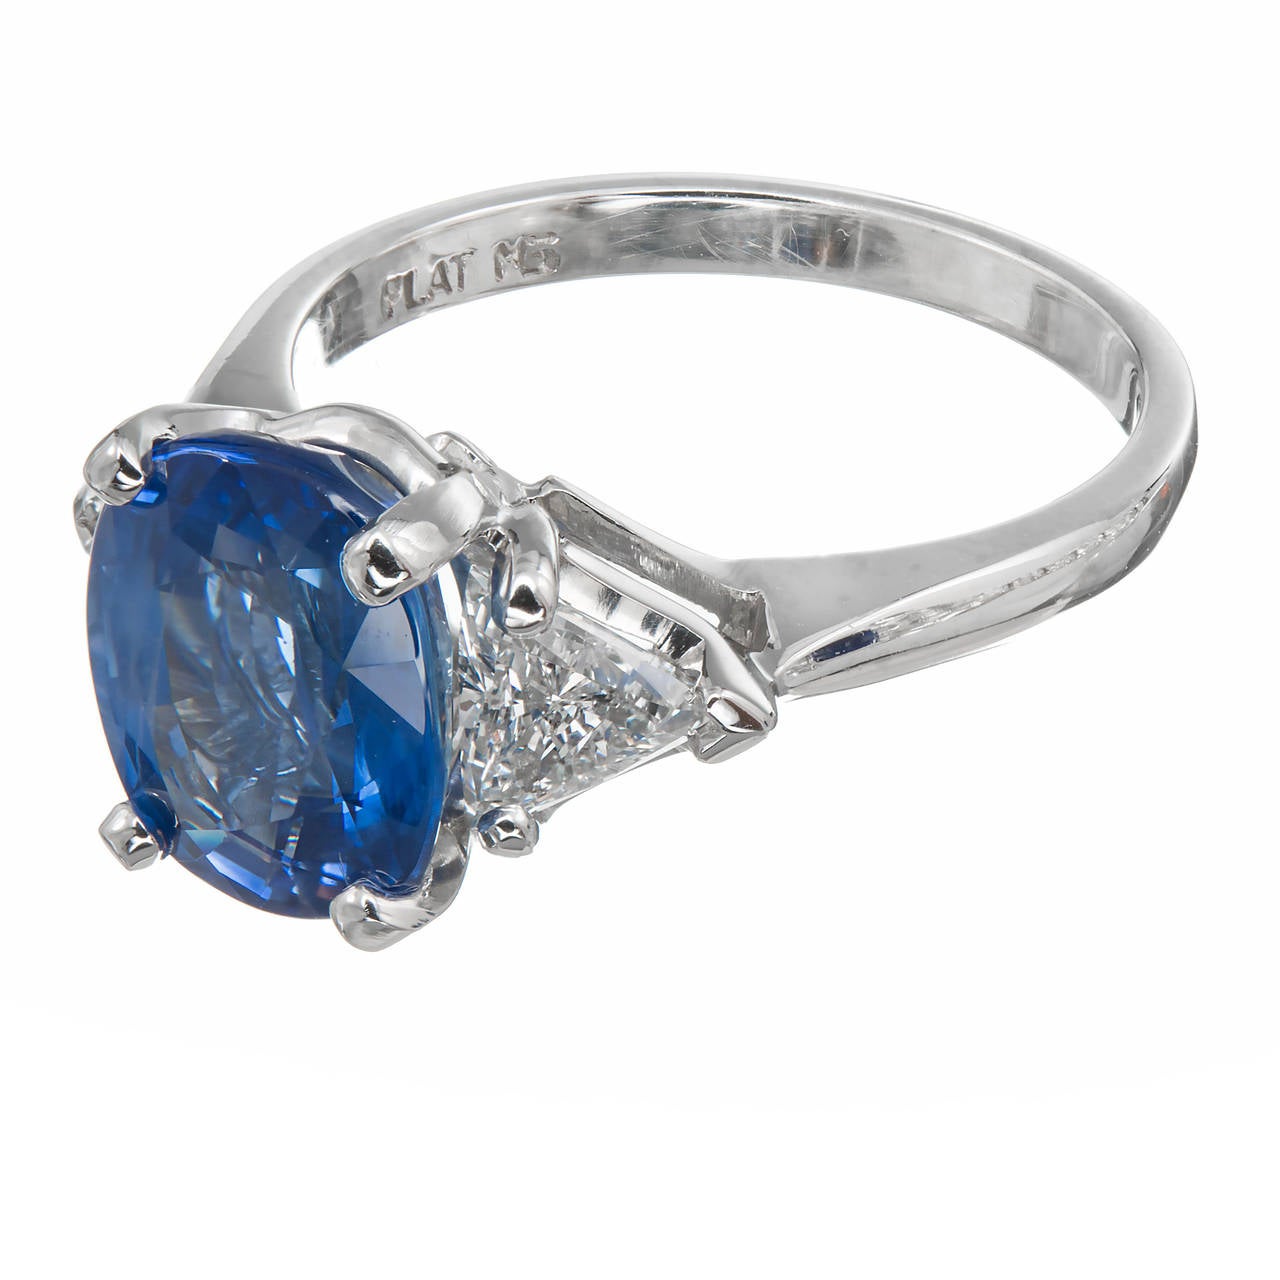 Strikingly bright and beautiful pure cornflower blue natural simple heat only certified Sapphire ring with very bright high color trilliant sides. The center stone is one of those rare Sapphires that is bright top to bottom and side to side all